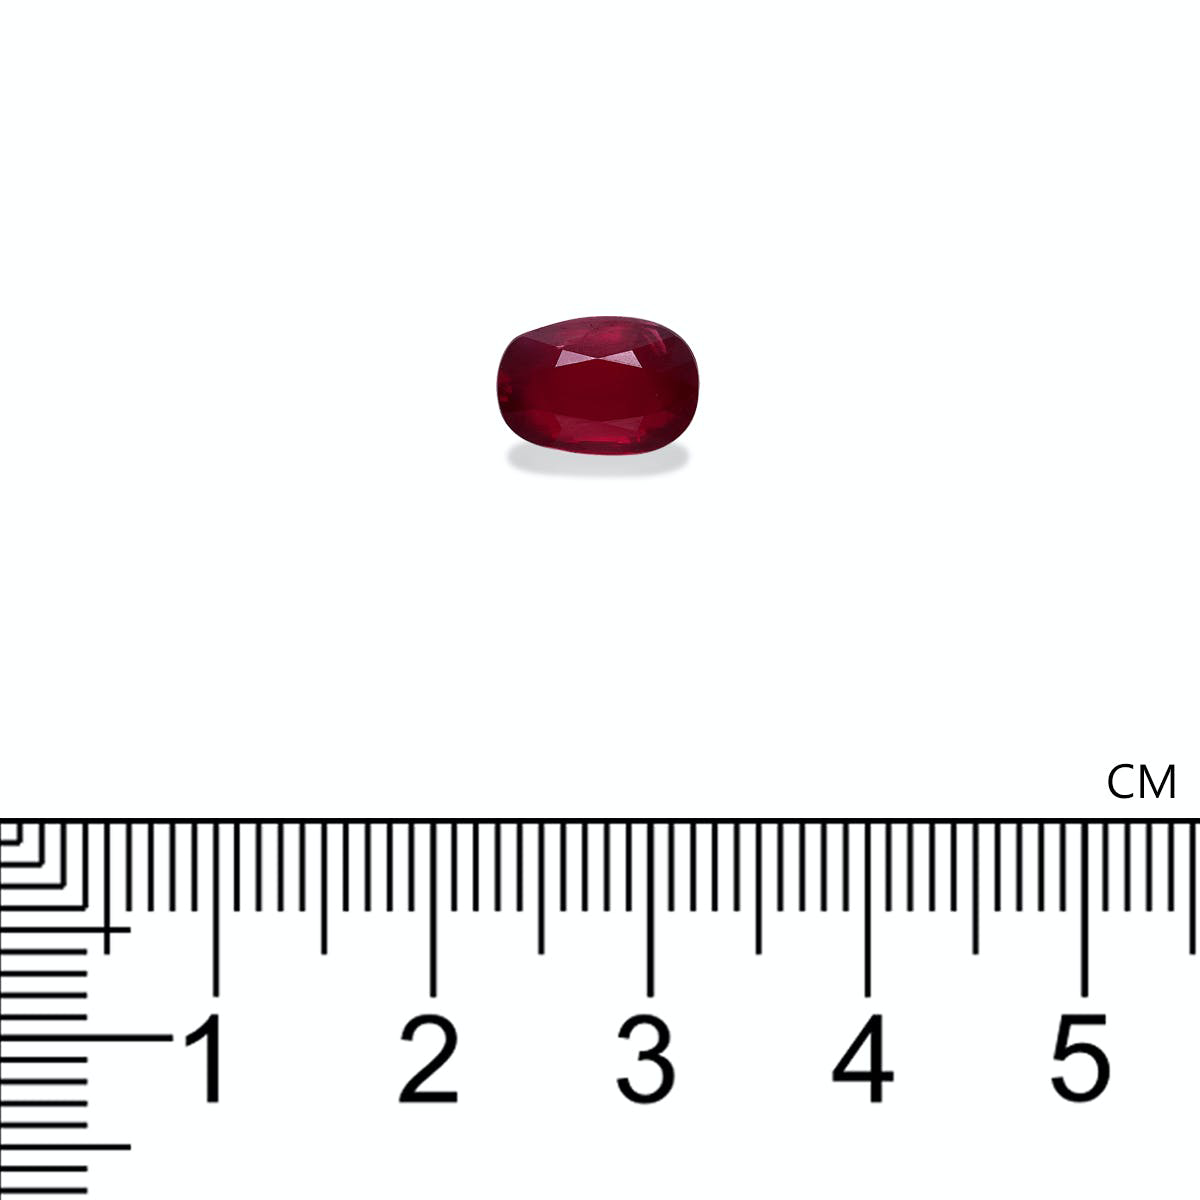 Picture of Pigeons Blood Unheated Mozambique Ruby 3.02ct (S86-81)